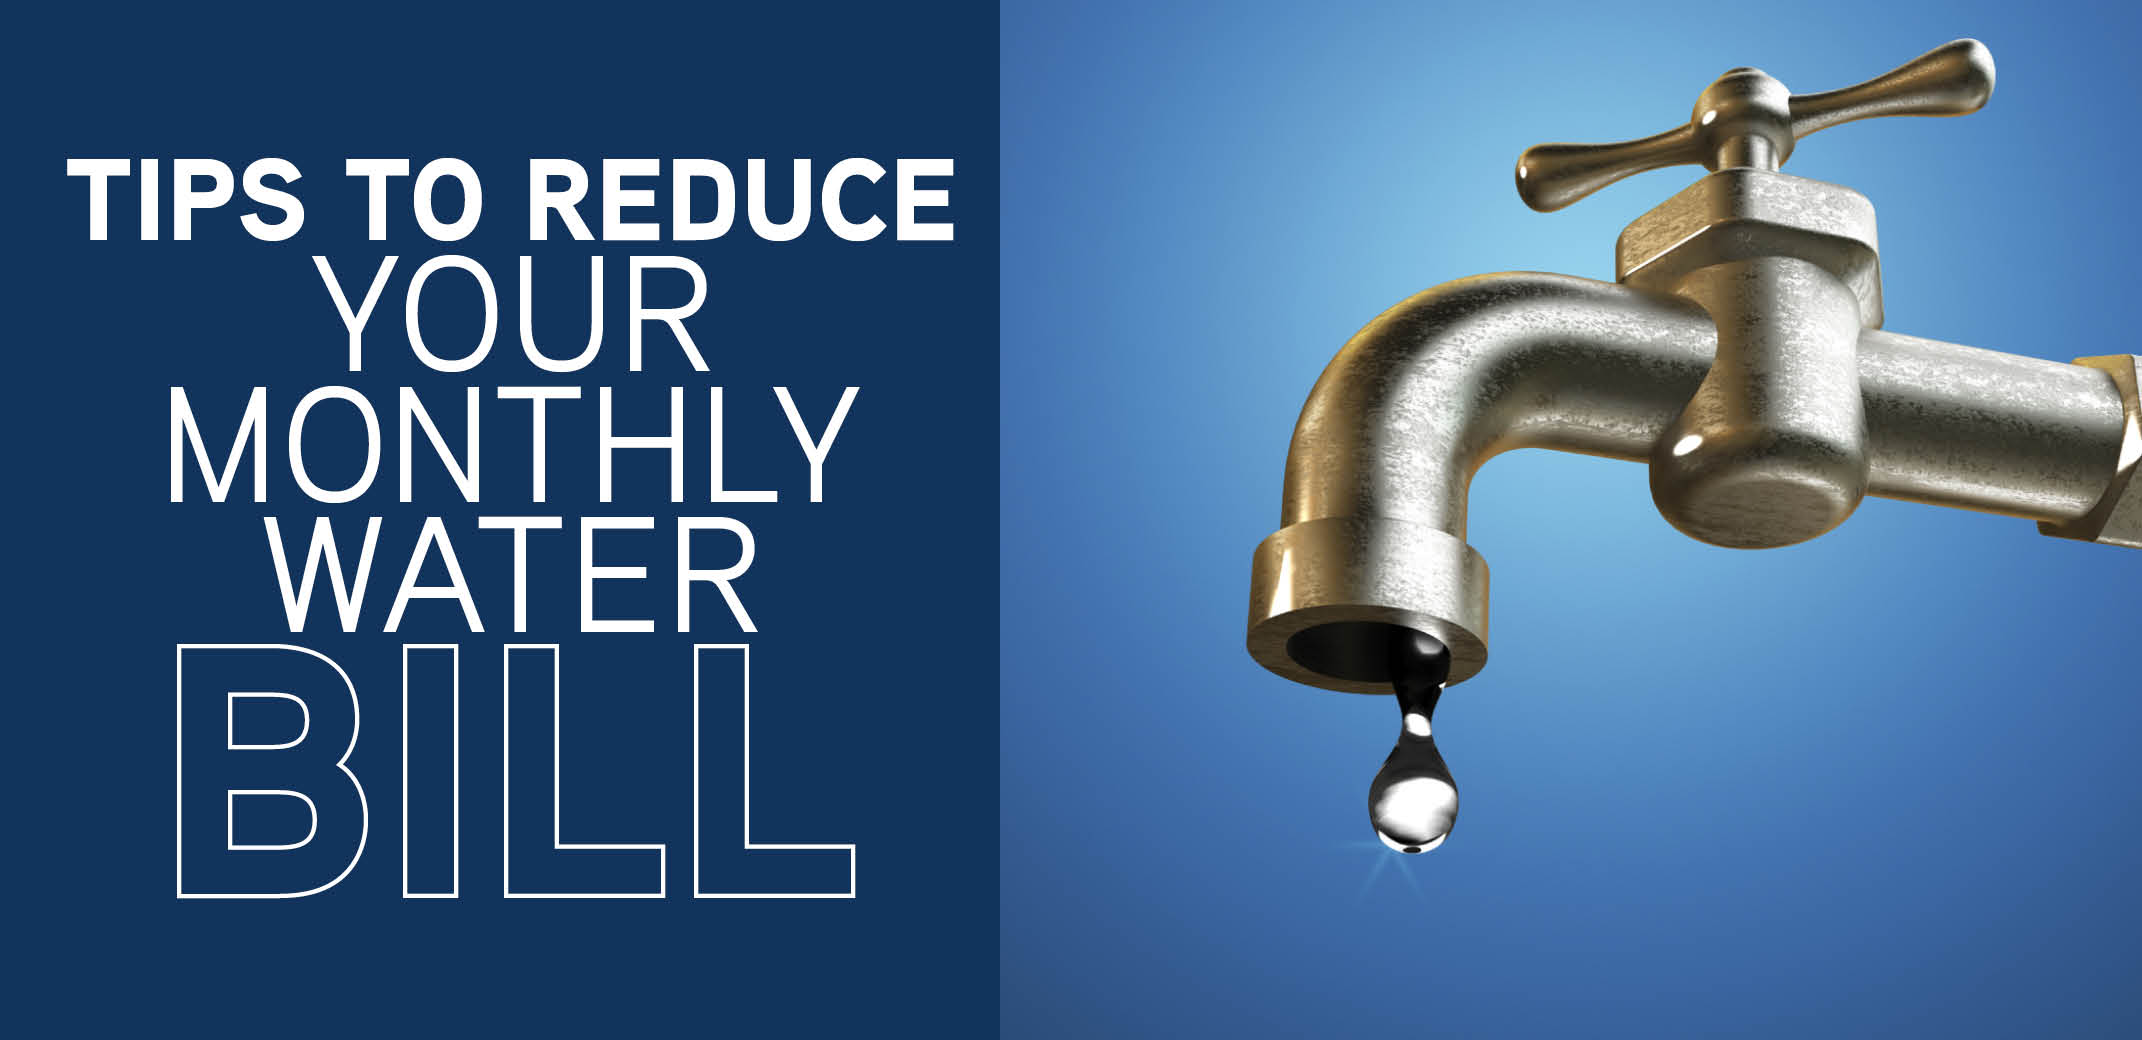 Tips to Reduce Your Monthly Water Bill